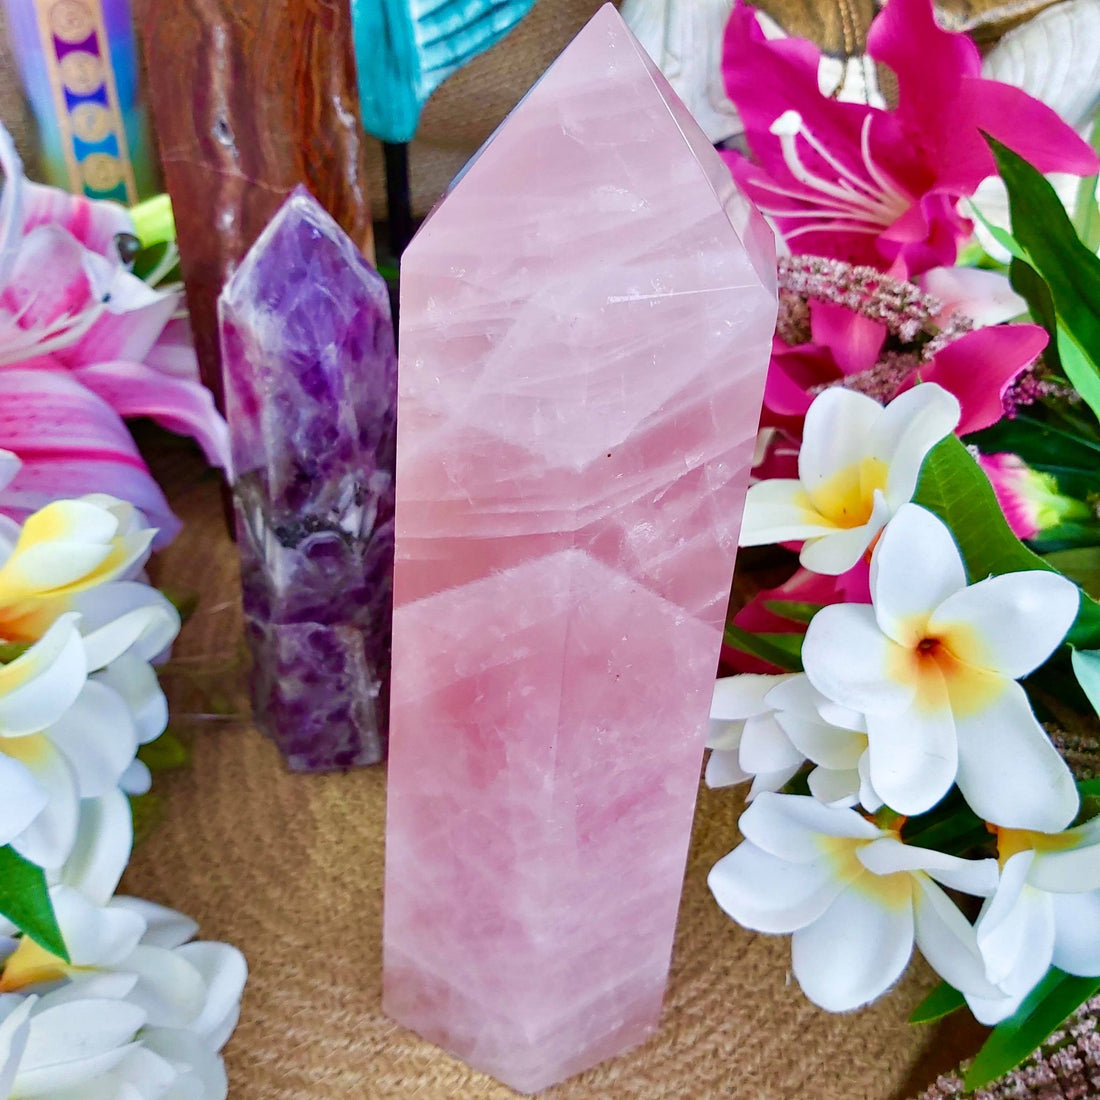 ✨ROSE QUARTZ DIVINE LOVE✨Meanings, Spiritual Benefits, and How to use this Crystal in Daily Life?